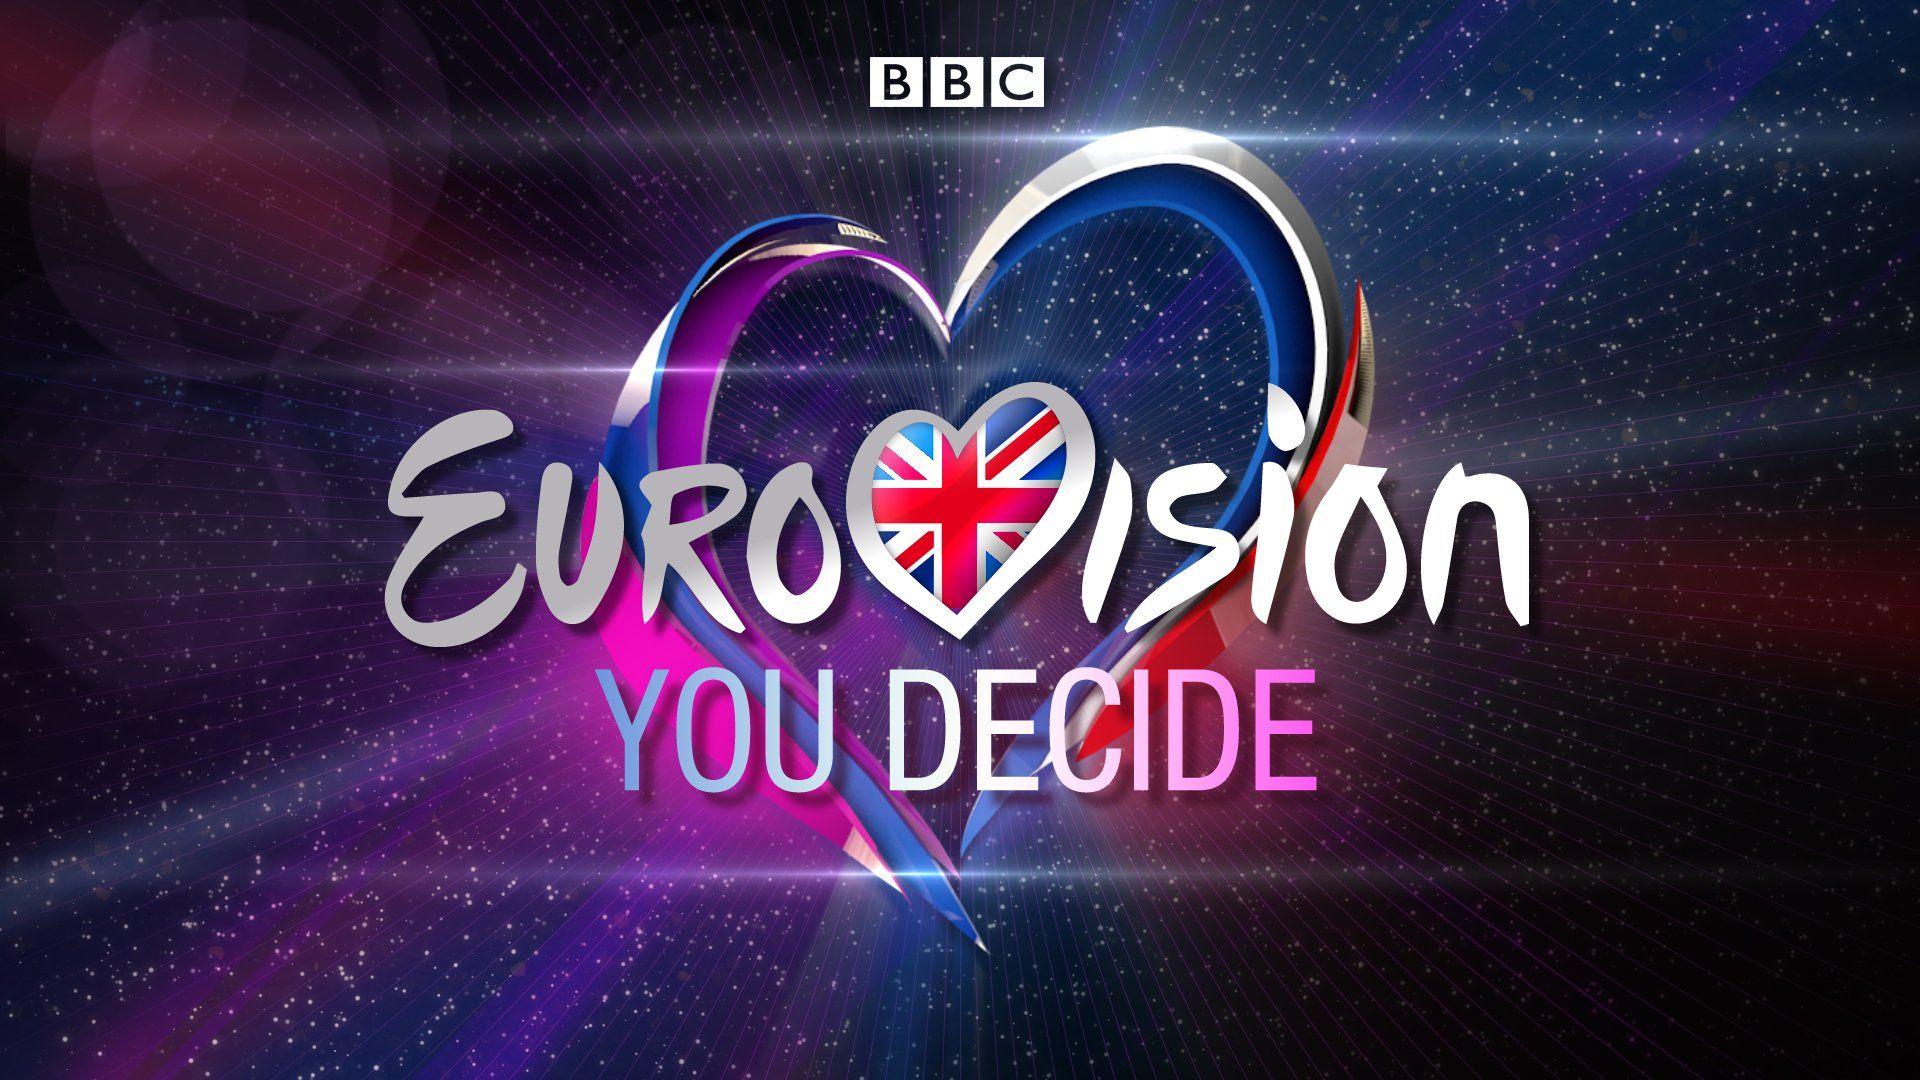 BBC calls for songs for Eurovision 2018!